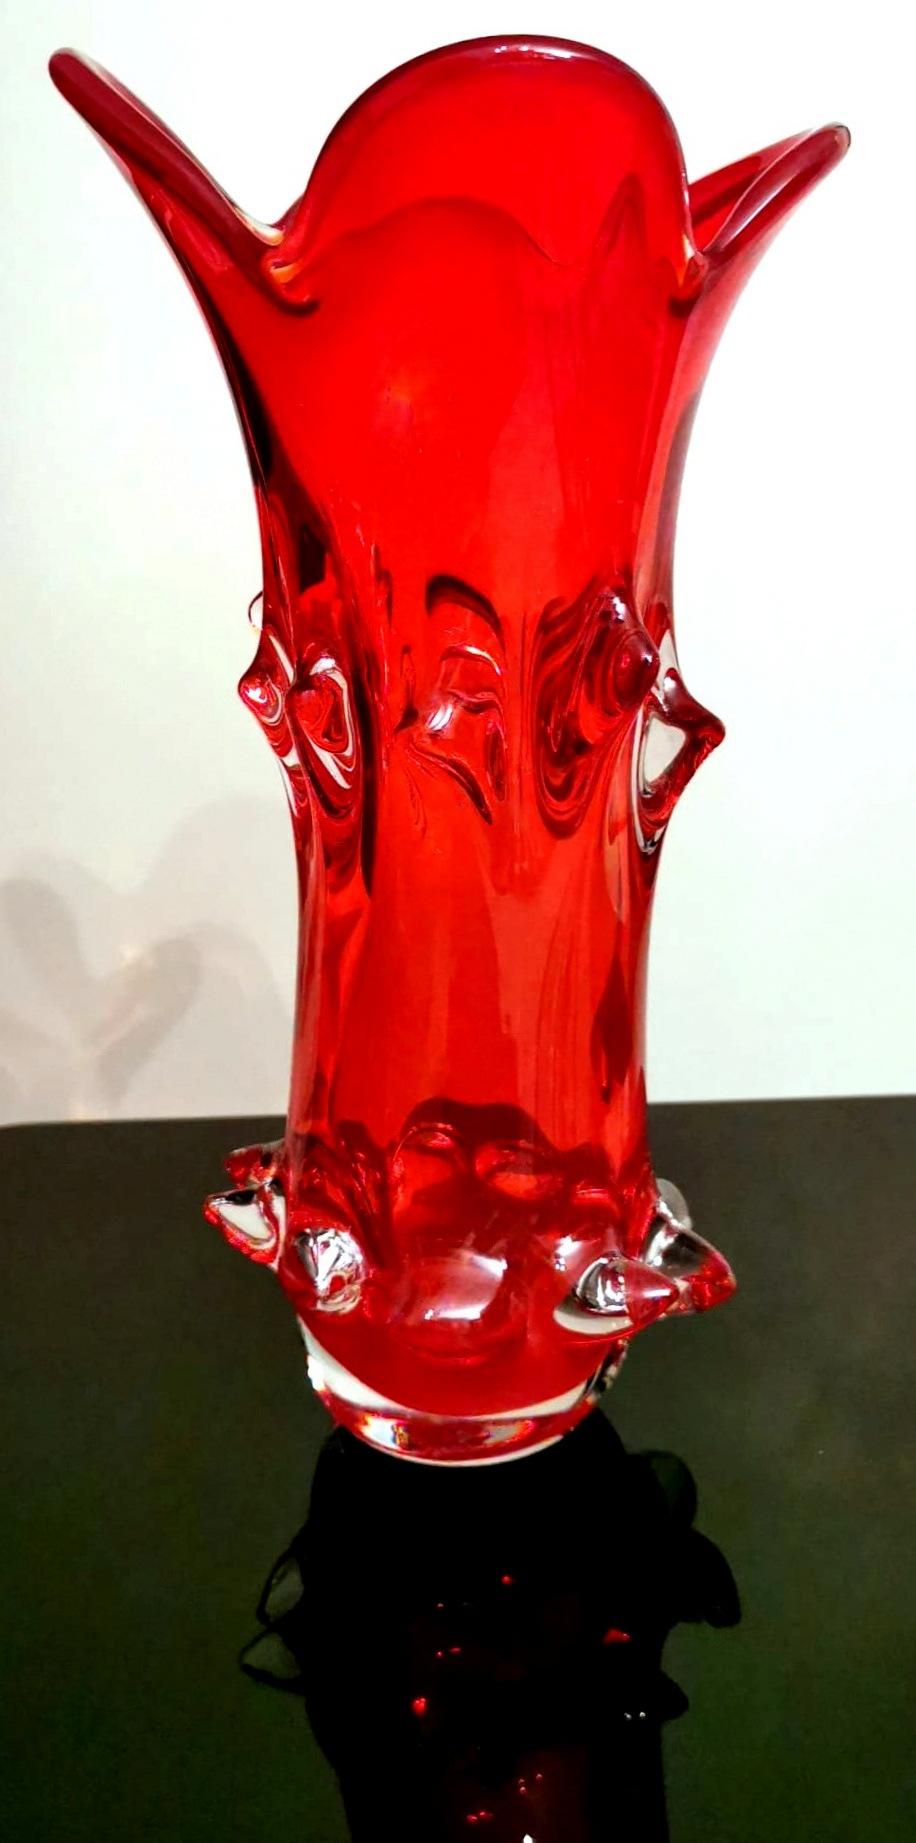 We kindly suggest you read the whole description, because with it we try to give you detailed technical and historical information to guarantee the authenticity of our objects.
Seductive red vase in Murano glass (Italy) blown according to the